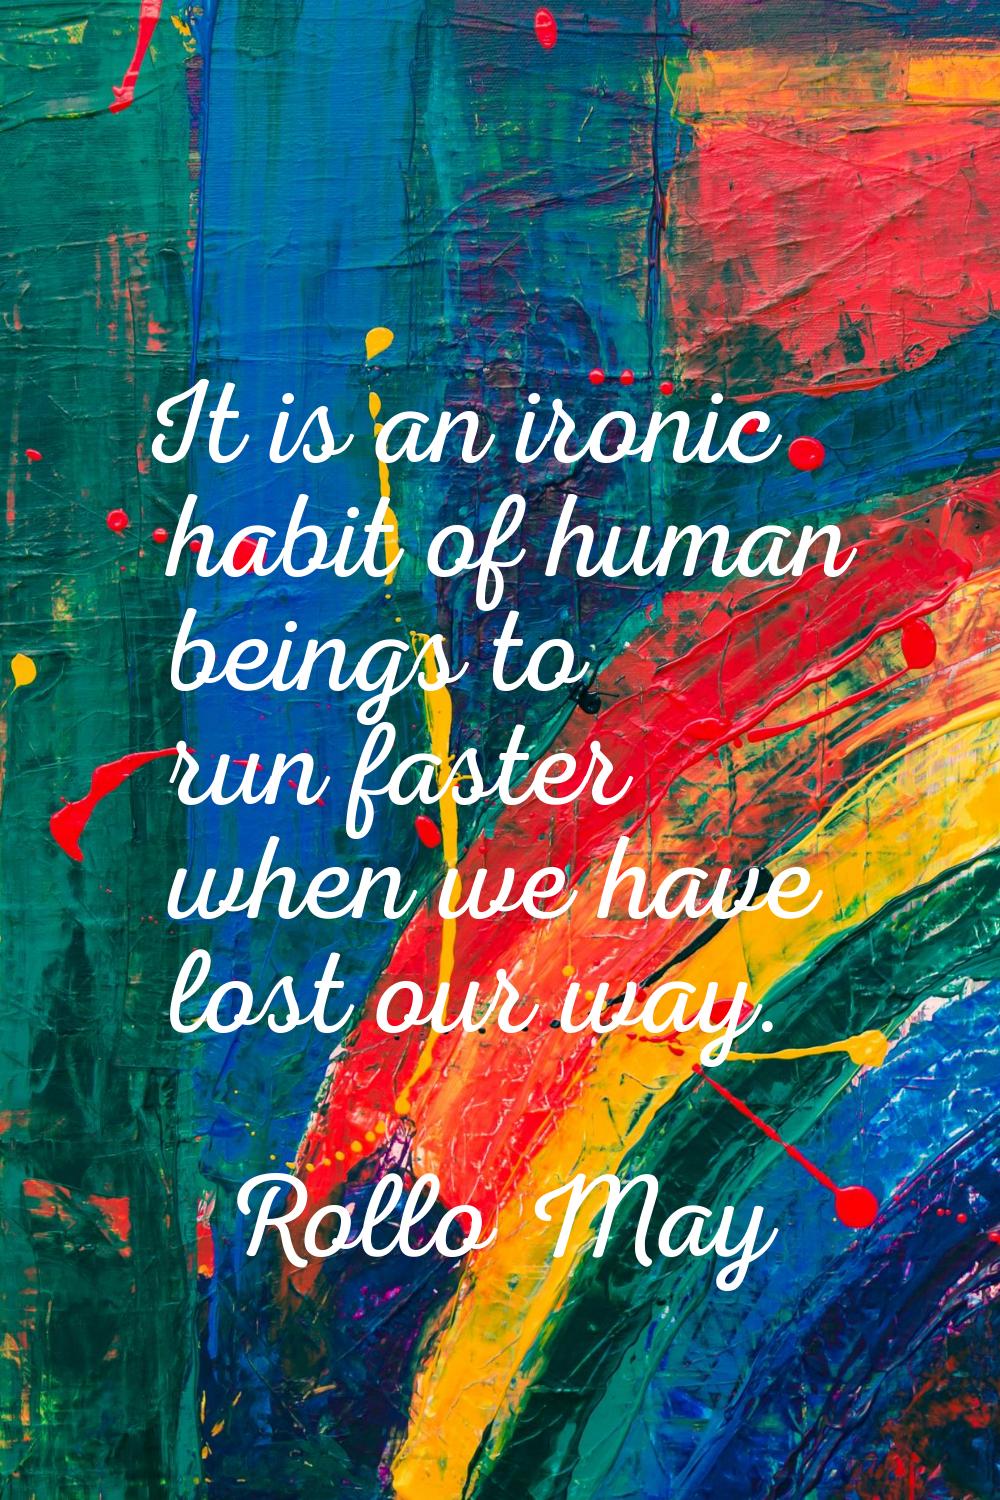 It is an ironic habit of human beings to run faster when we have lost our way.